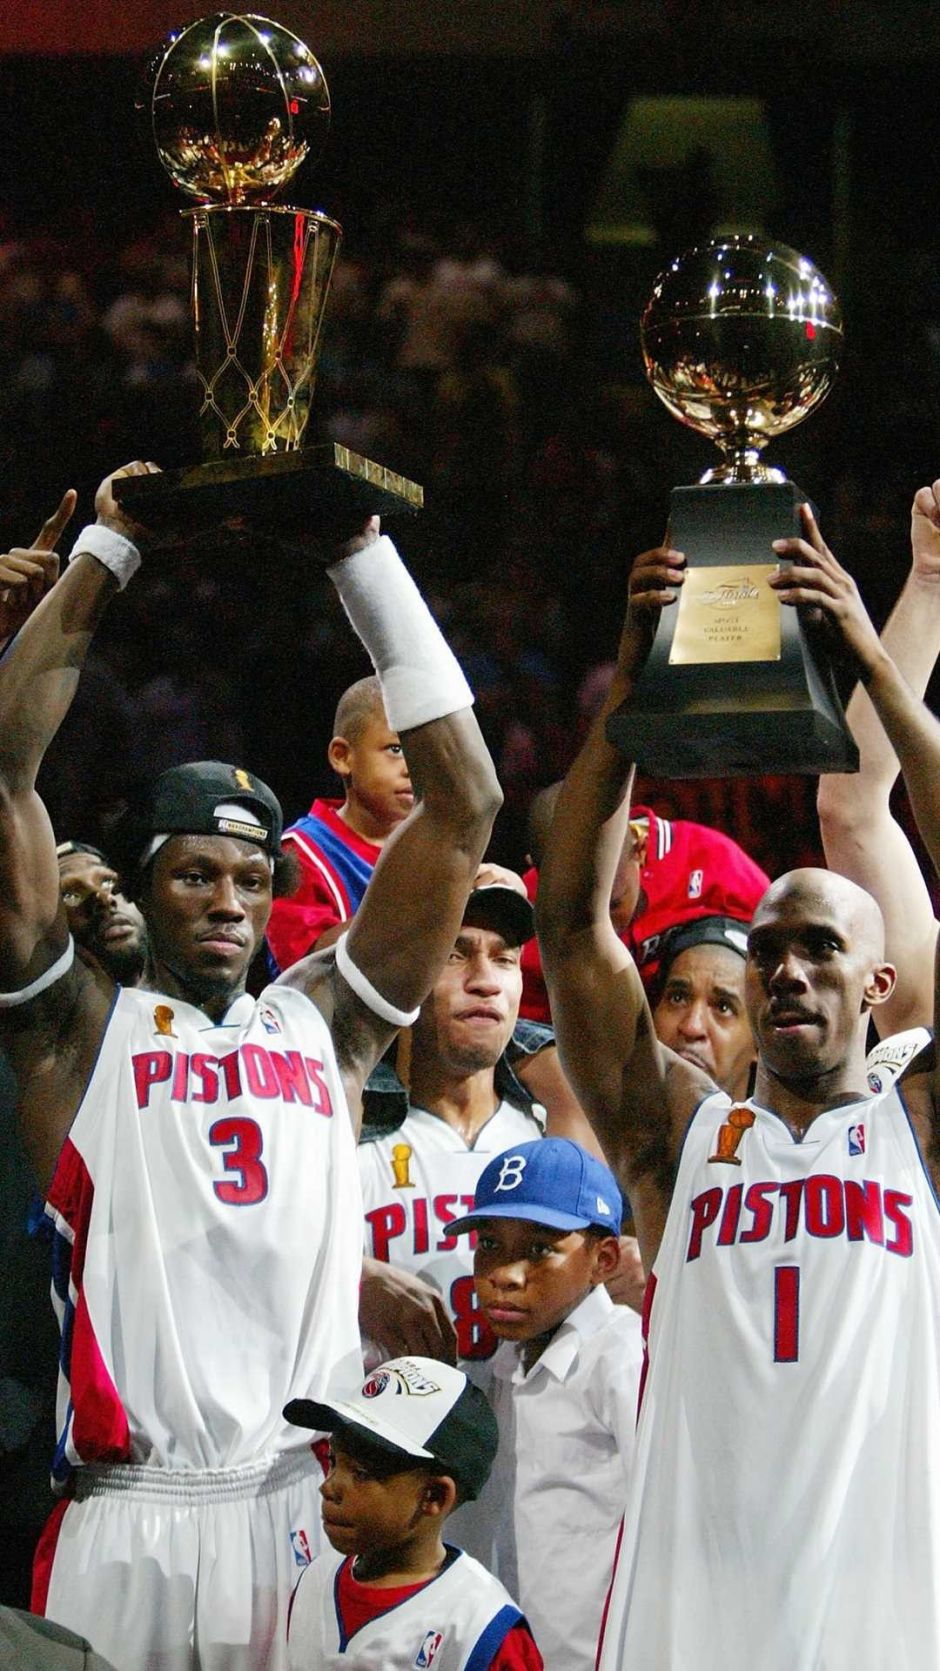 You have to take big shots to win championships and 1mrbigshot got the ball to the right person at the right time consistently. 17 years ago today, the Detroit Pistons secured their third NBA Championship. Where were you when this happened?